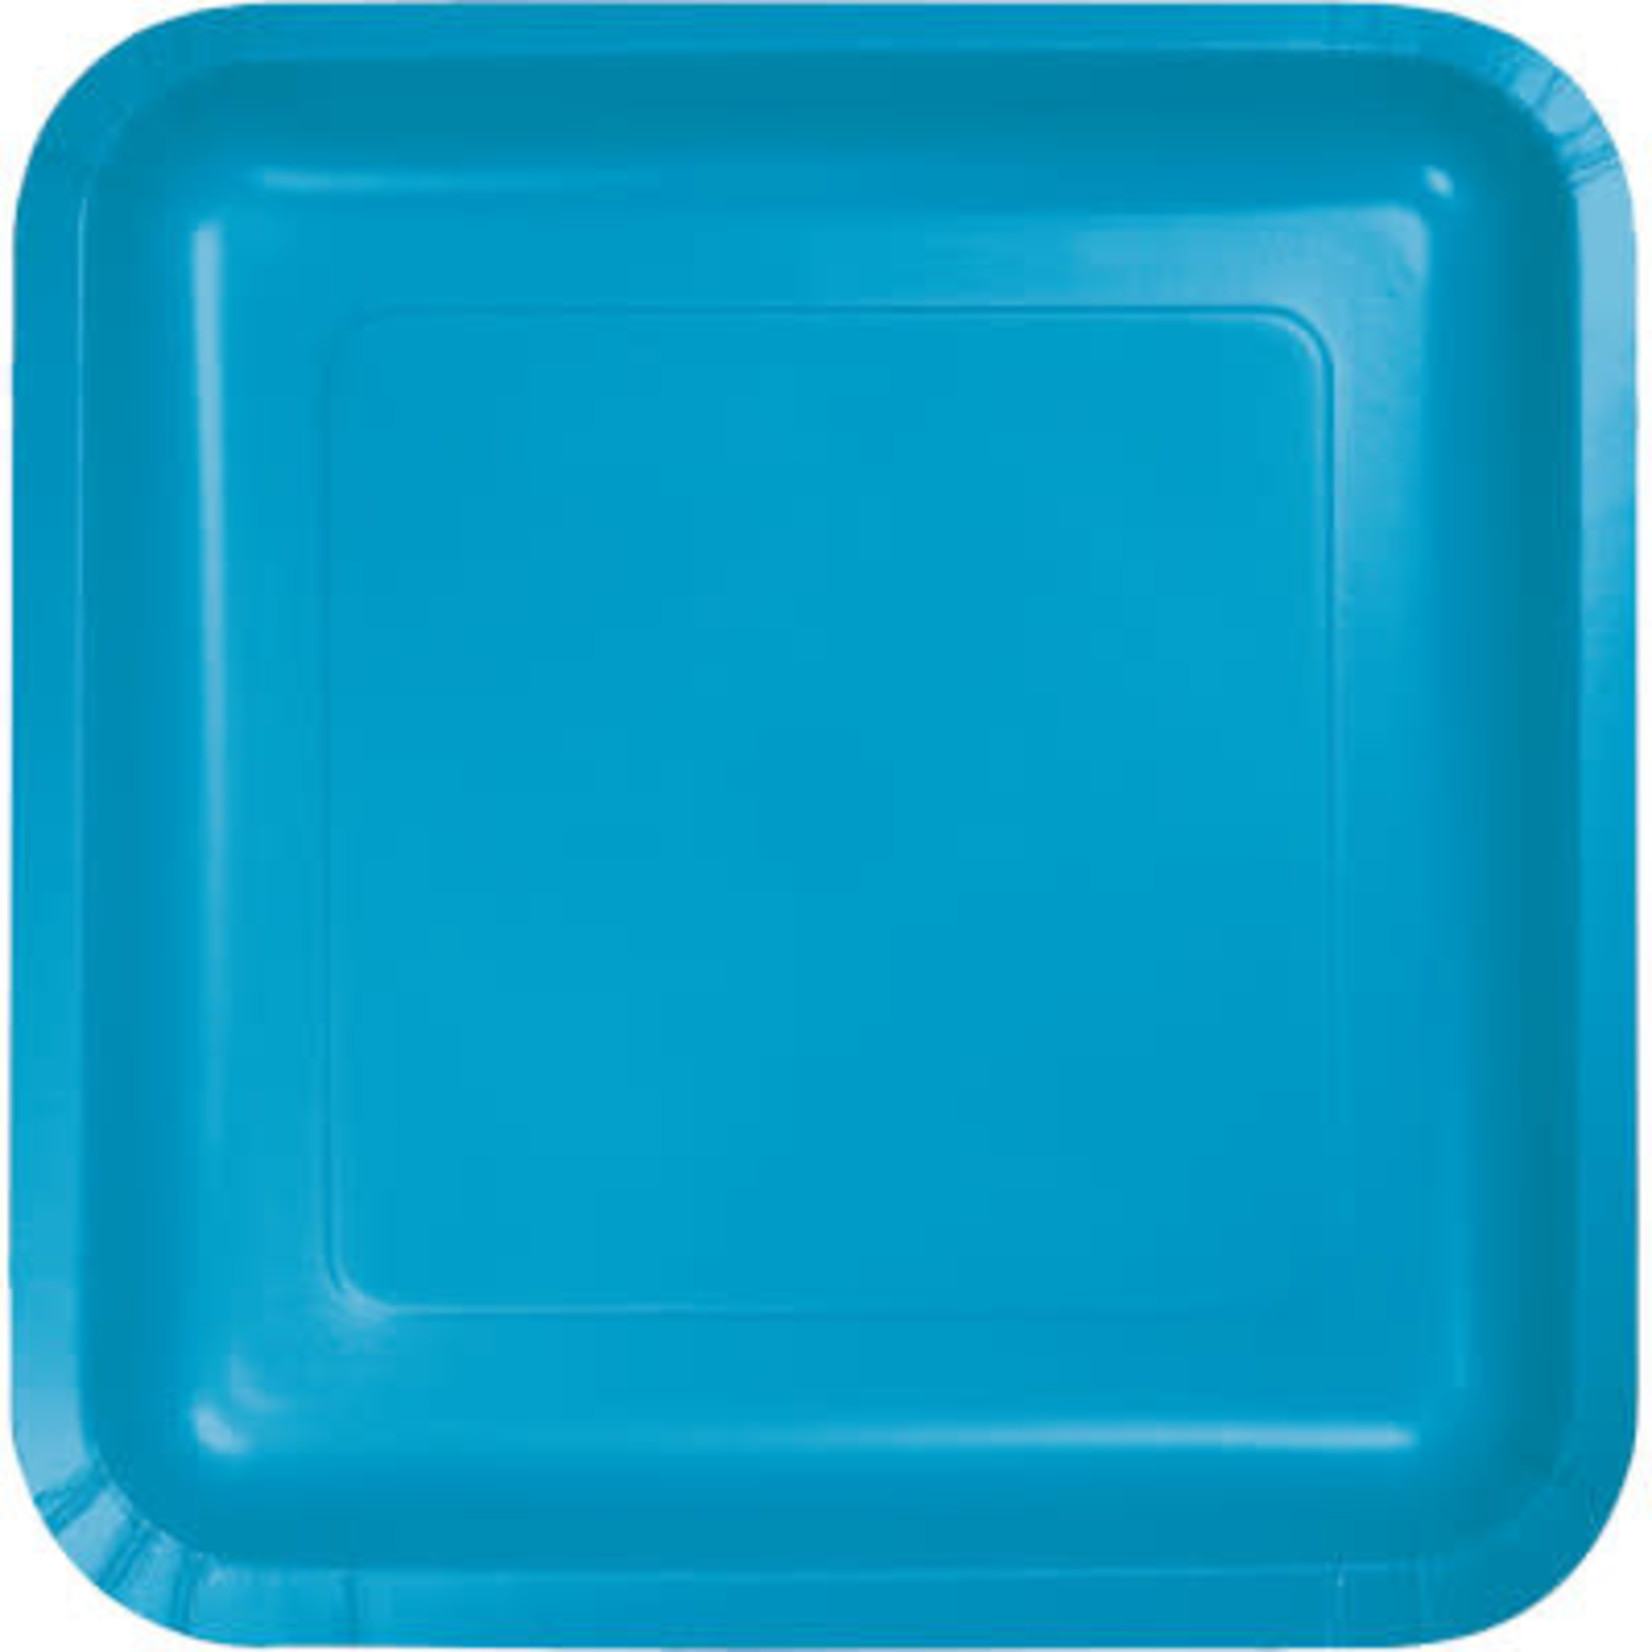 Touch of Color 9" Turquoise Blue Square Plates - 18ct.